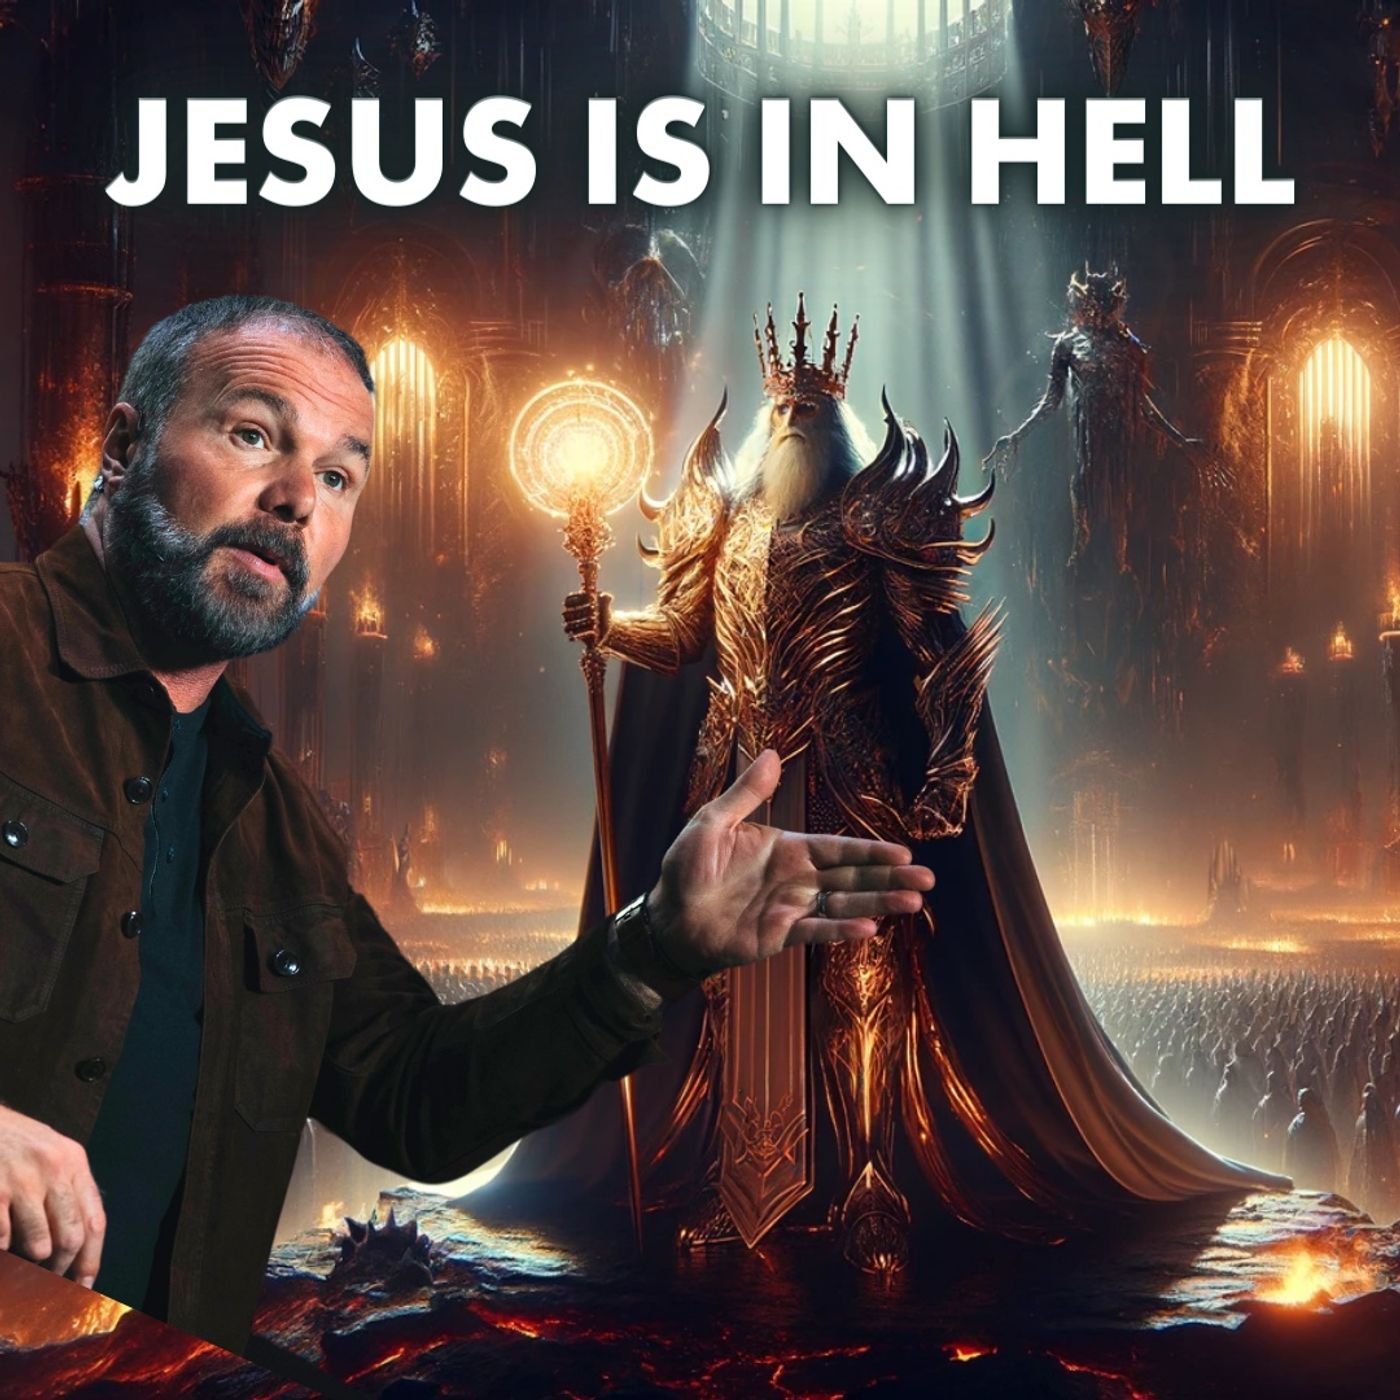 Jesus Rules Over Hell